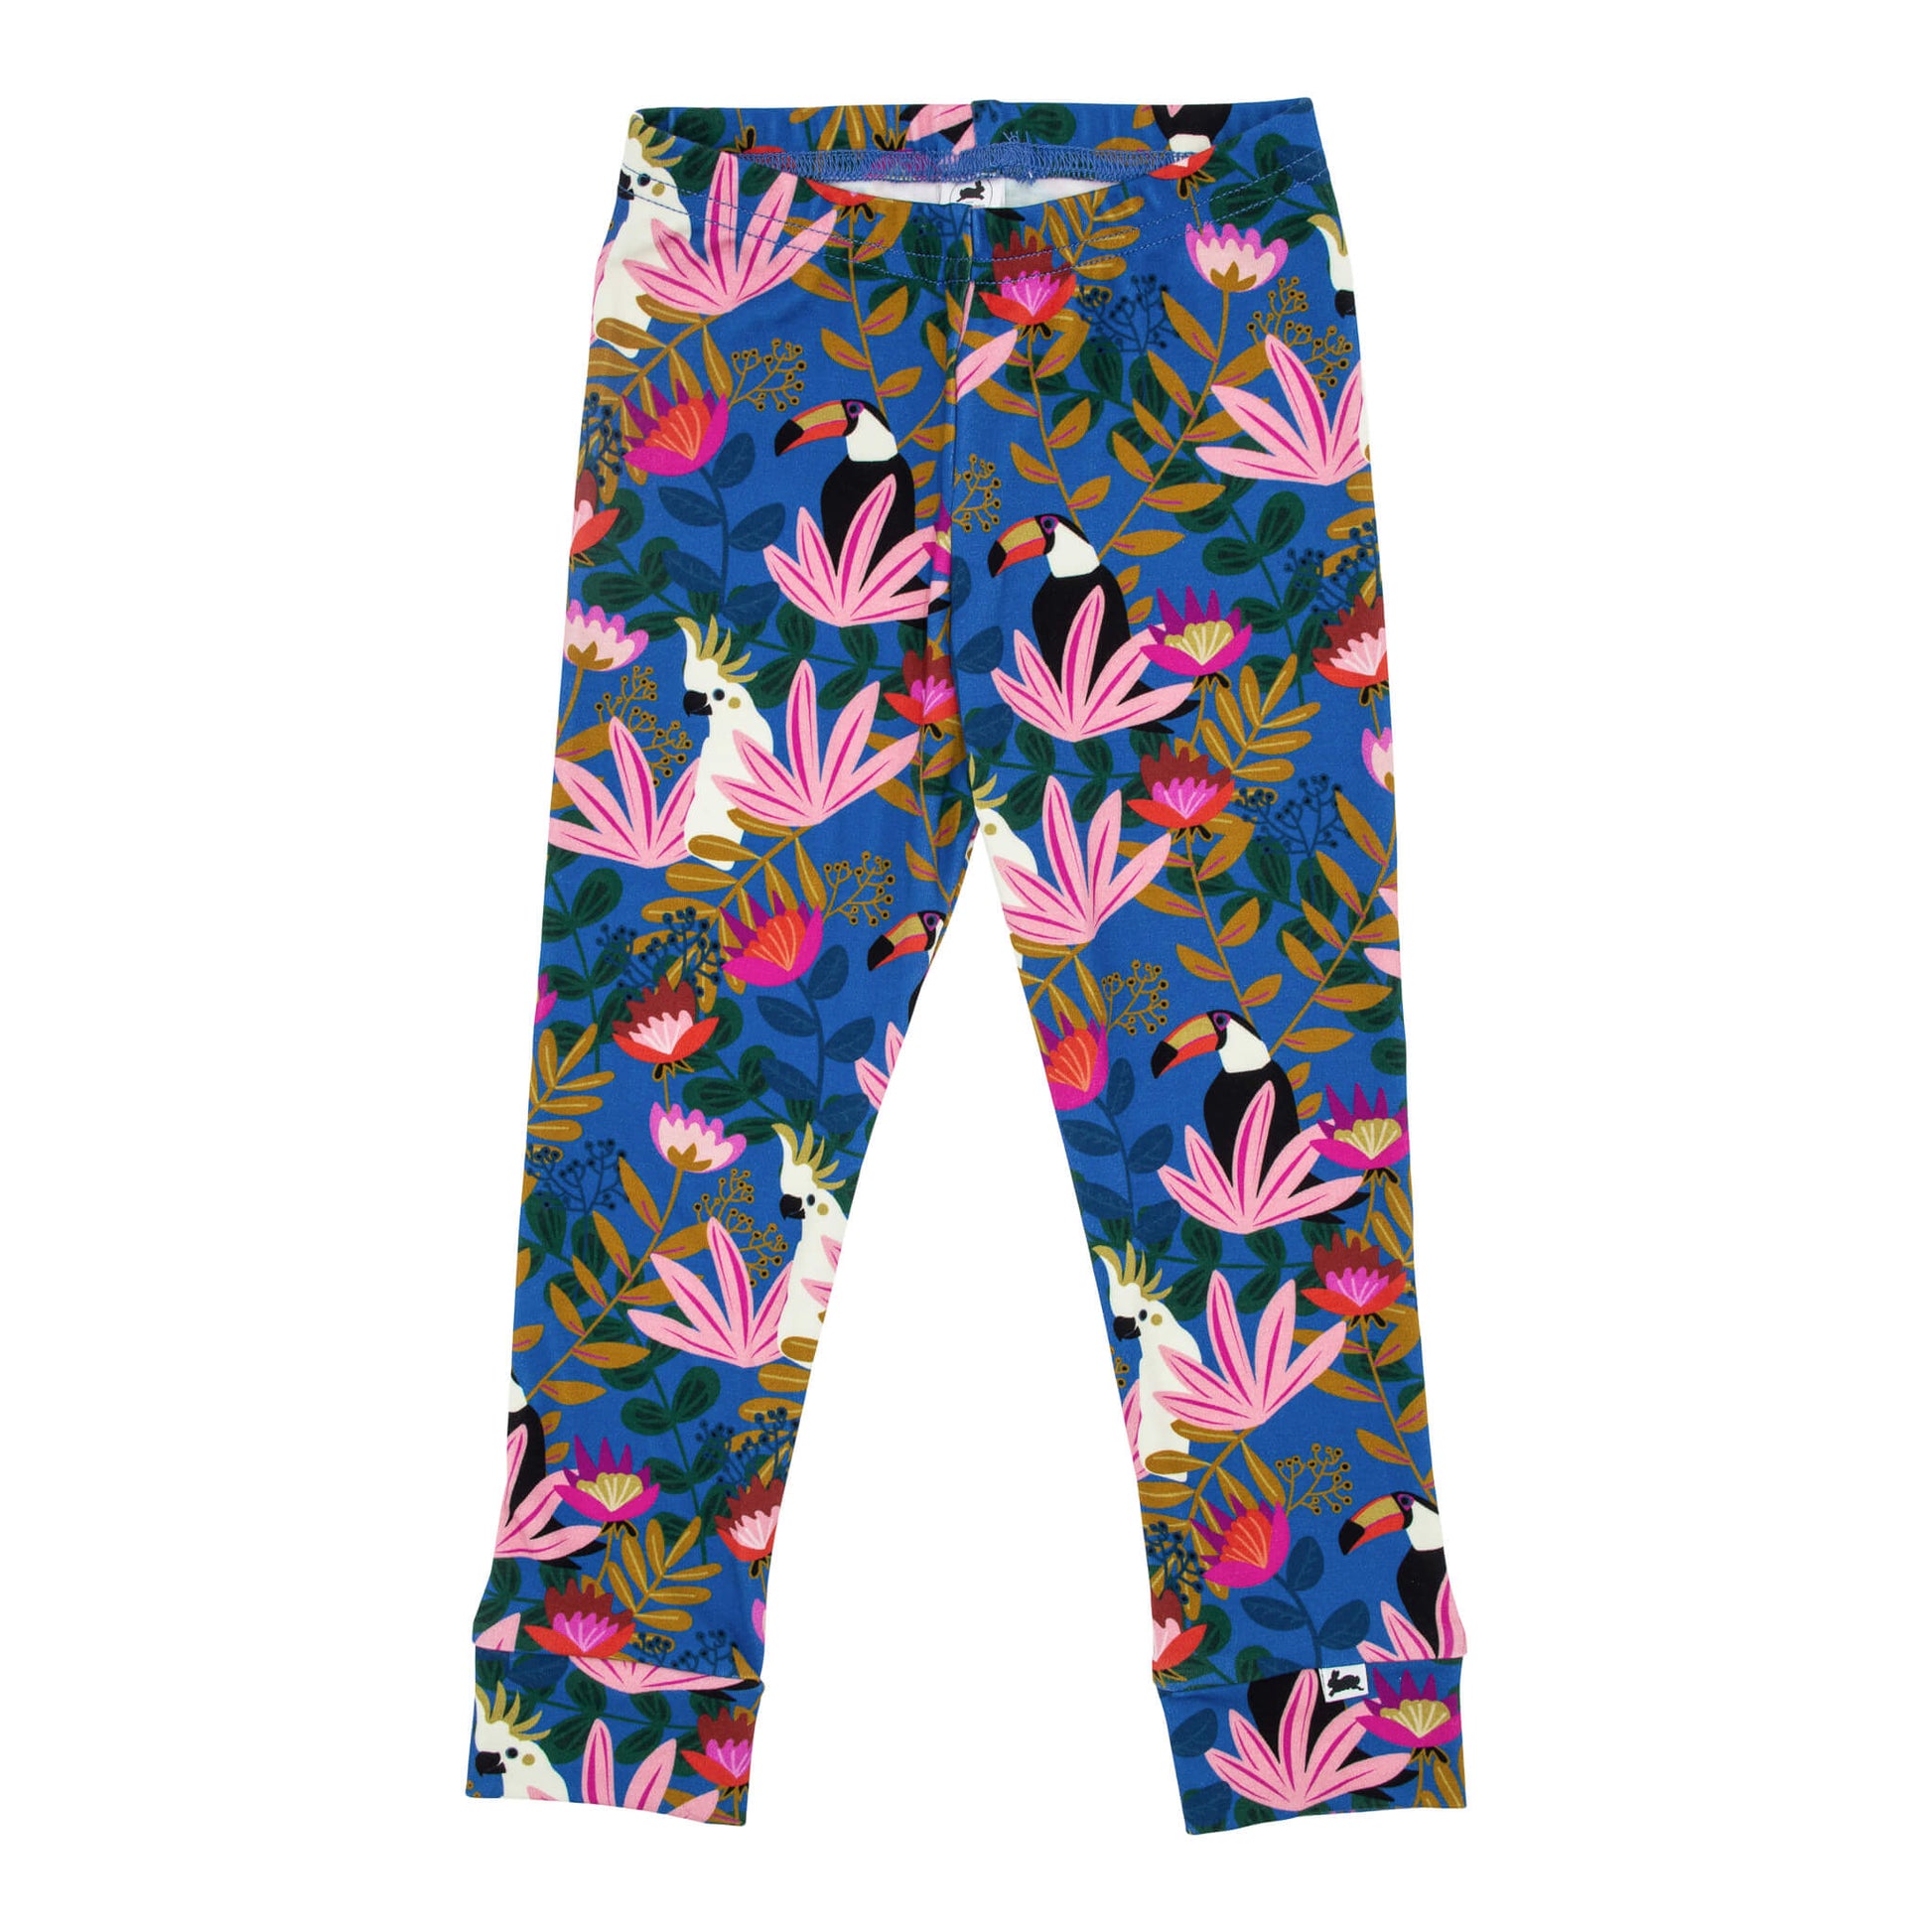 Athletic Legging Light Pink With Printed Flowers – Lively Kids